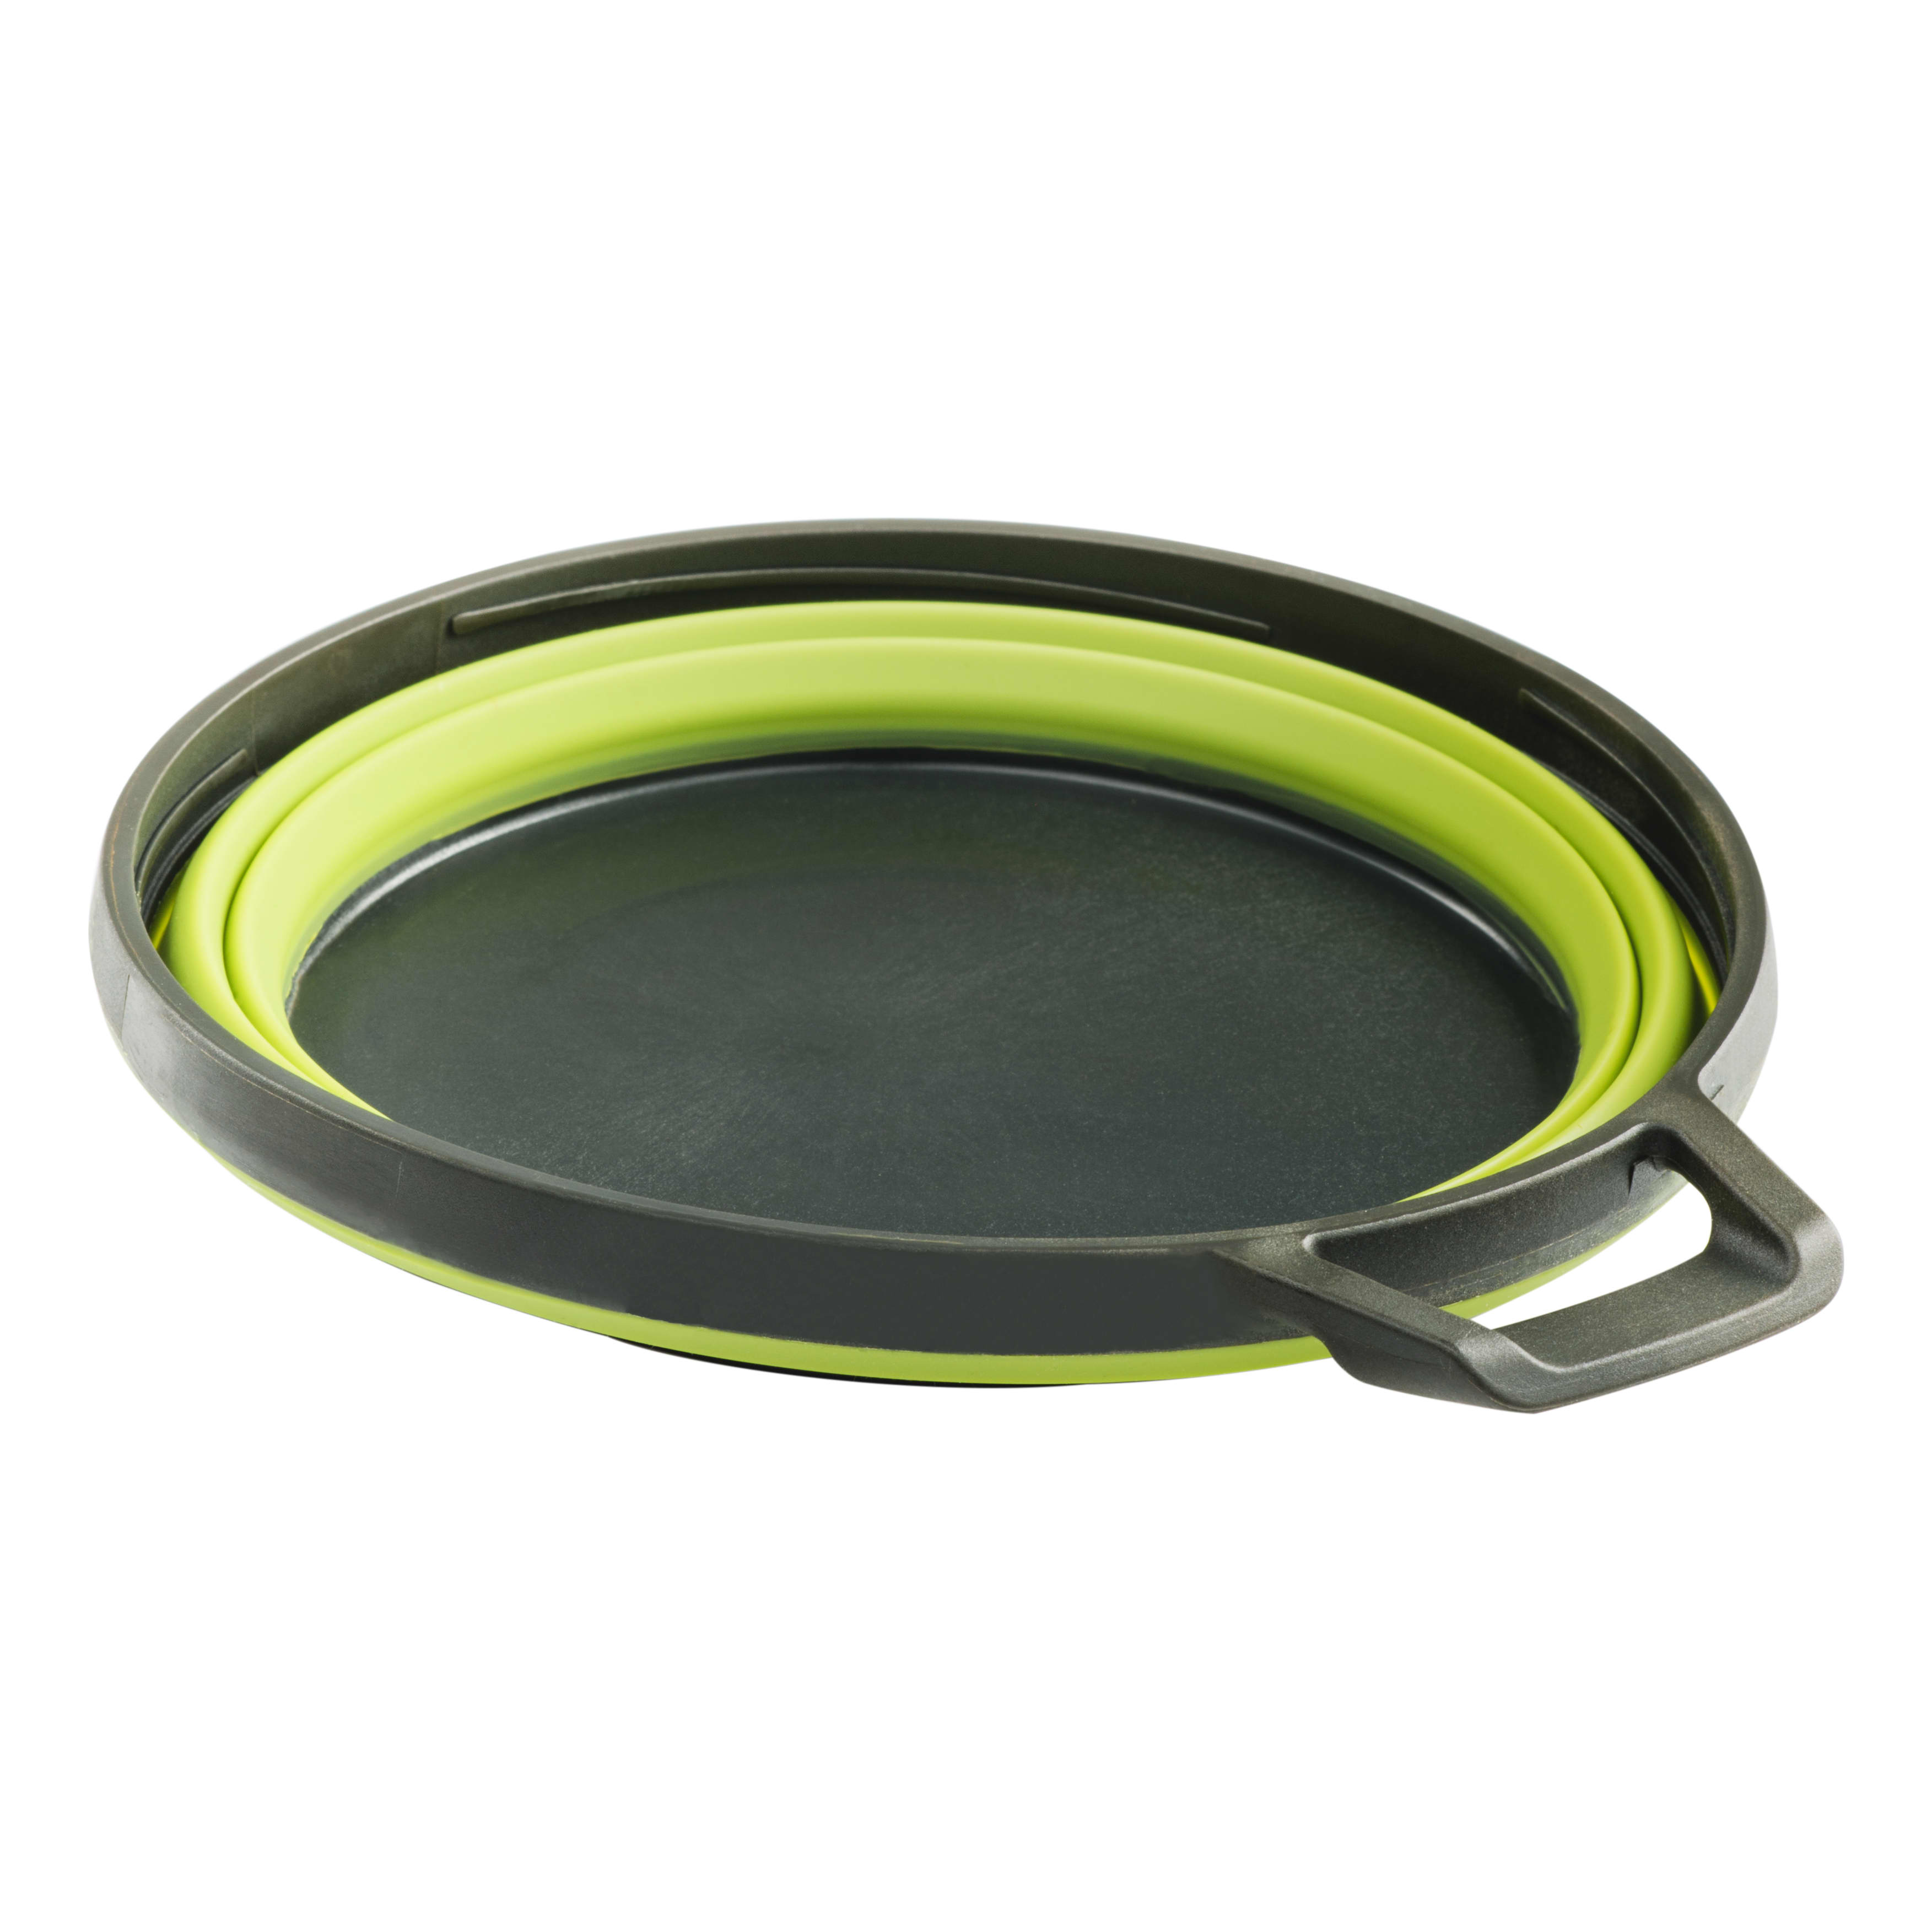 GSI Outdoors Escape Collapsible Bowl - Green - Collapsed View